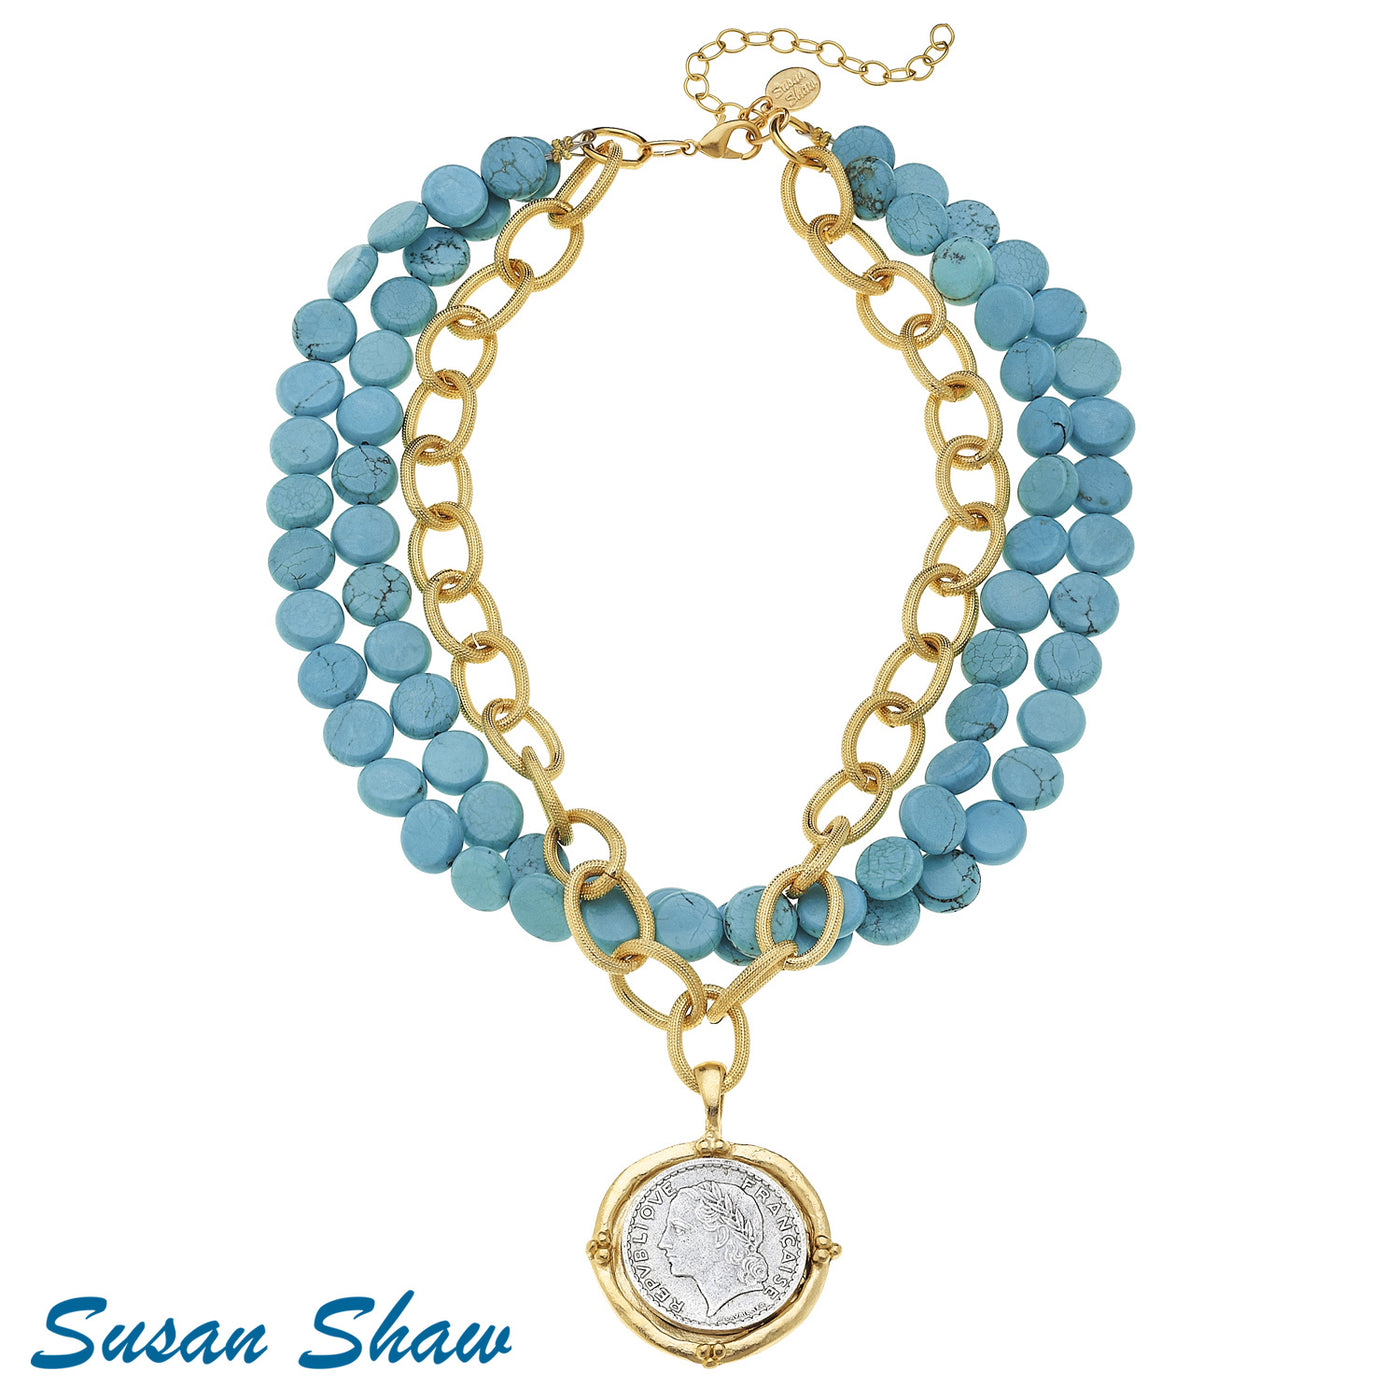 Susan Shaw Turquoise Coin Necklace